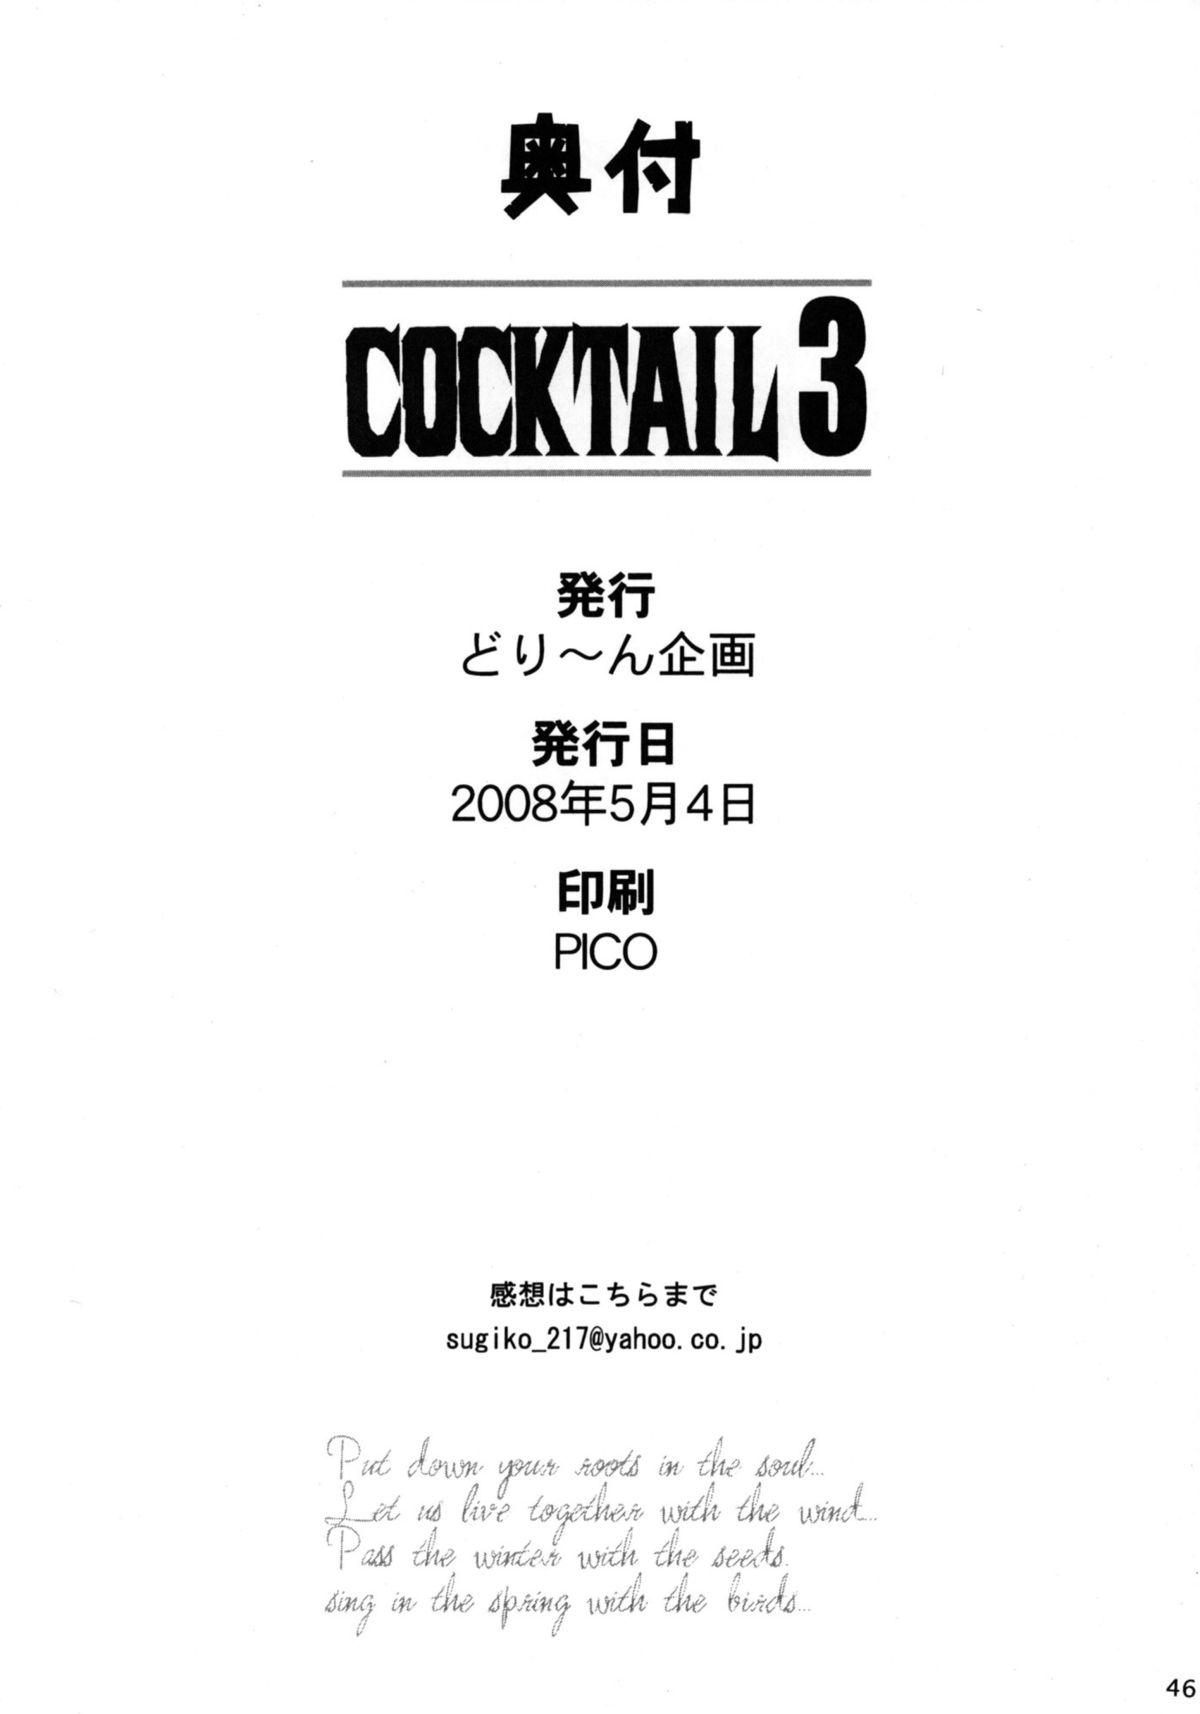 COCKTAIL 3 45